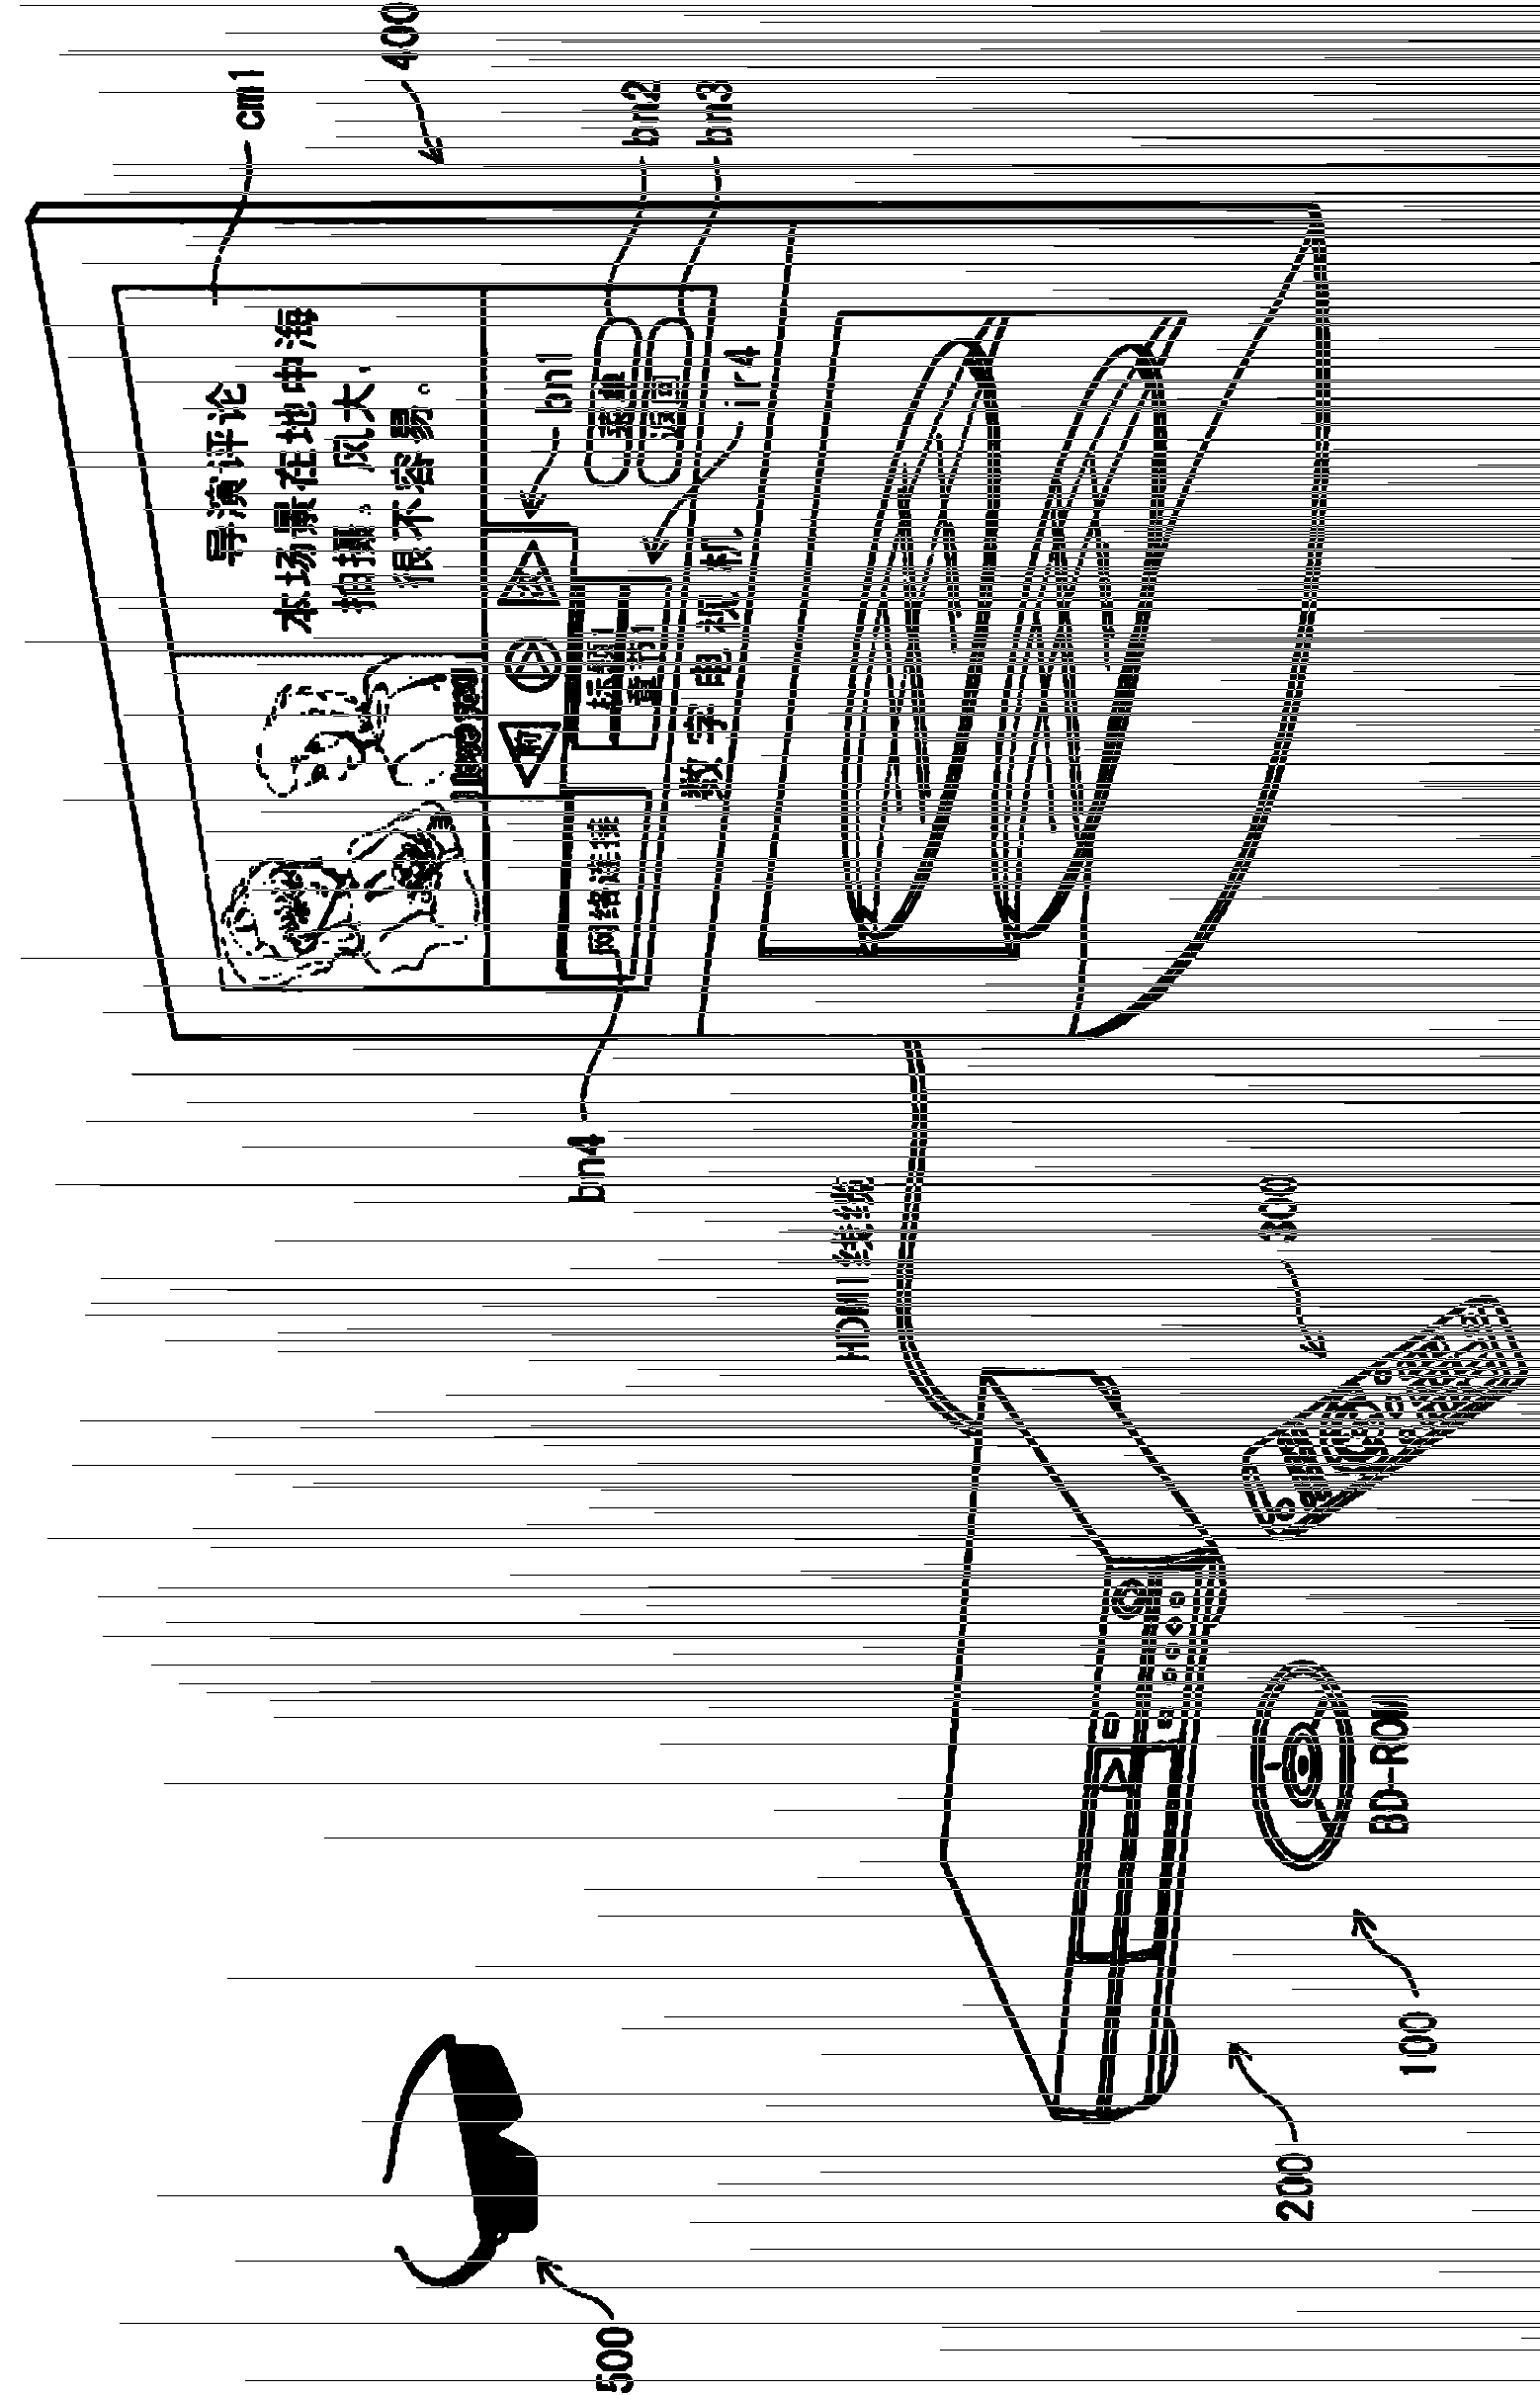 Reproduction device and reproduction method for stereoscopic reproduction